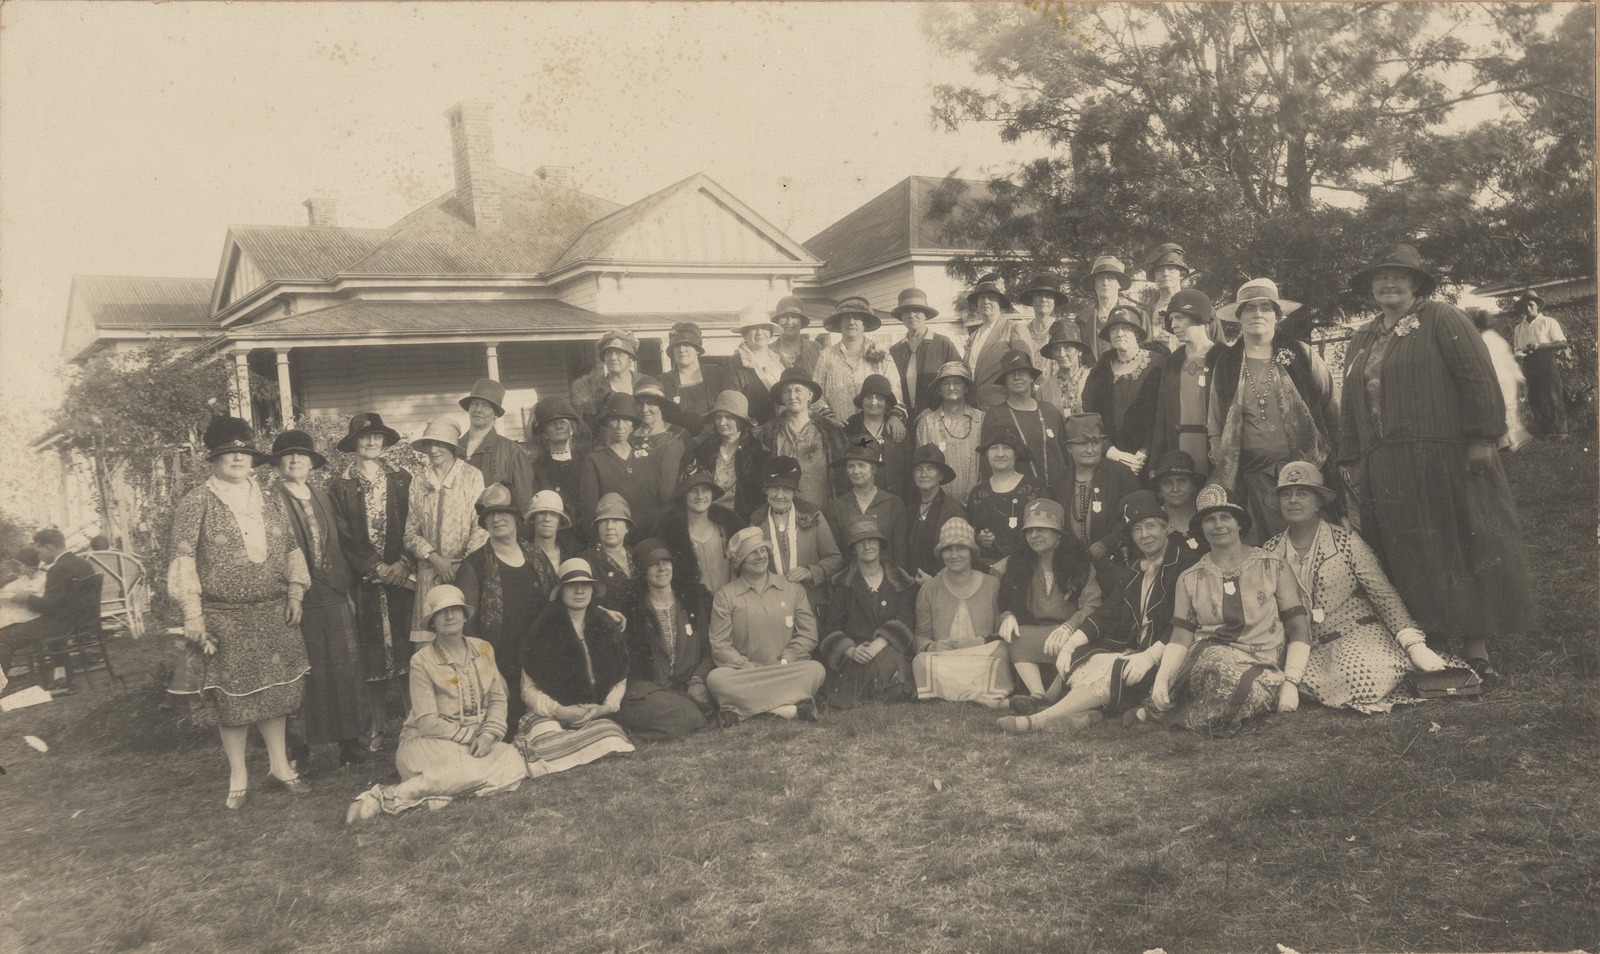 group of women in the QCWA pose for picture 